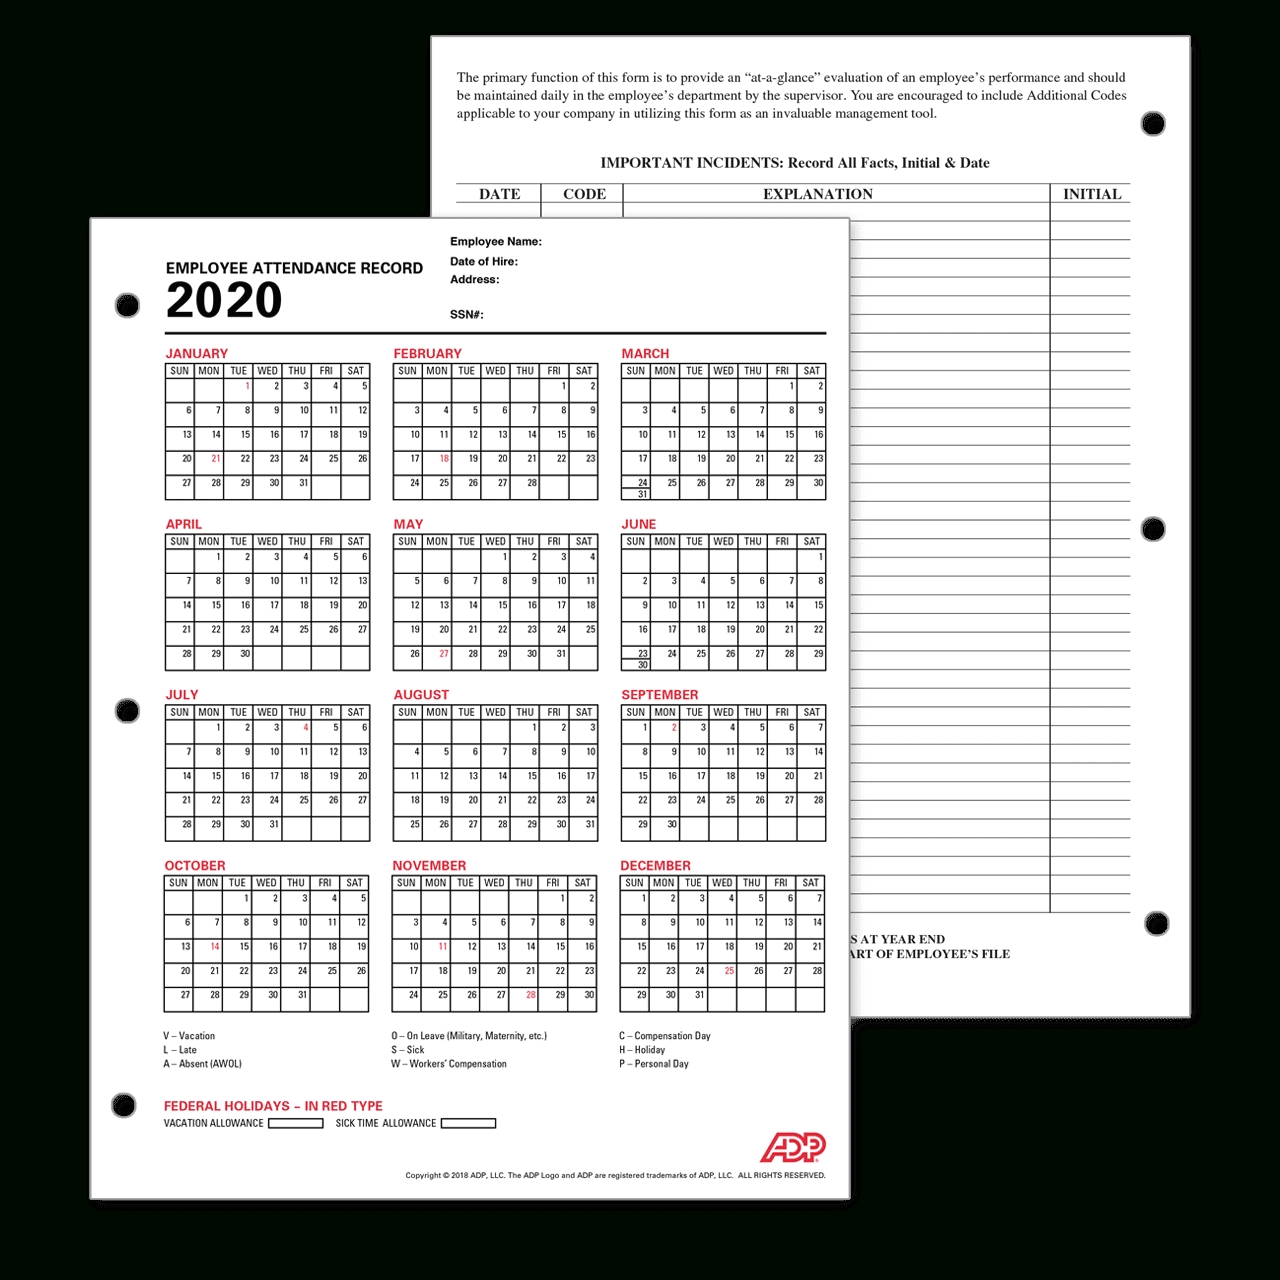 Adp Employee Attendance Record / Calendar with Free Employee Attendance Calendar 2020